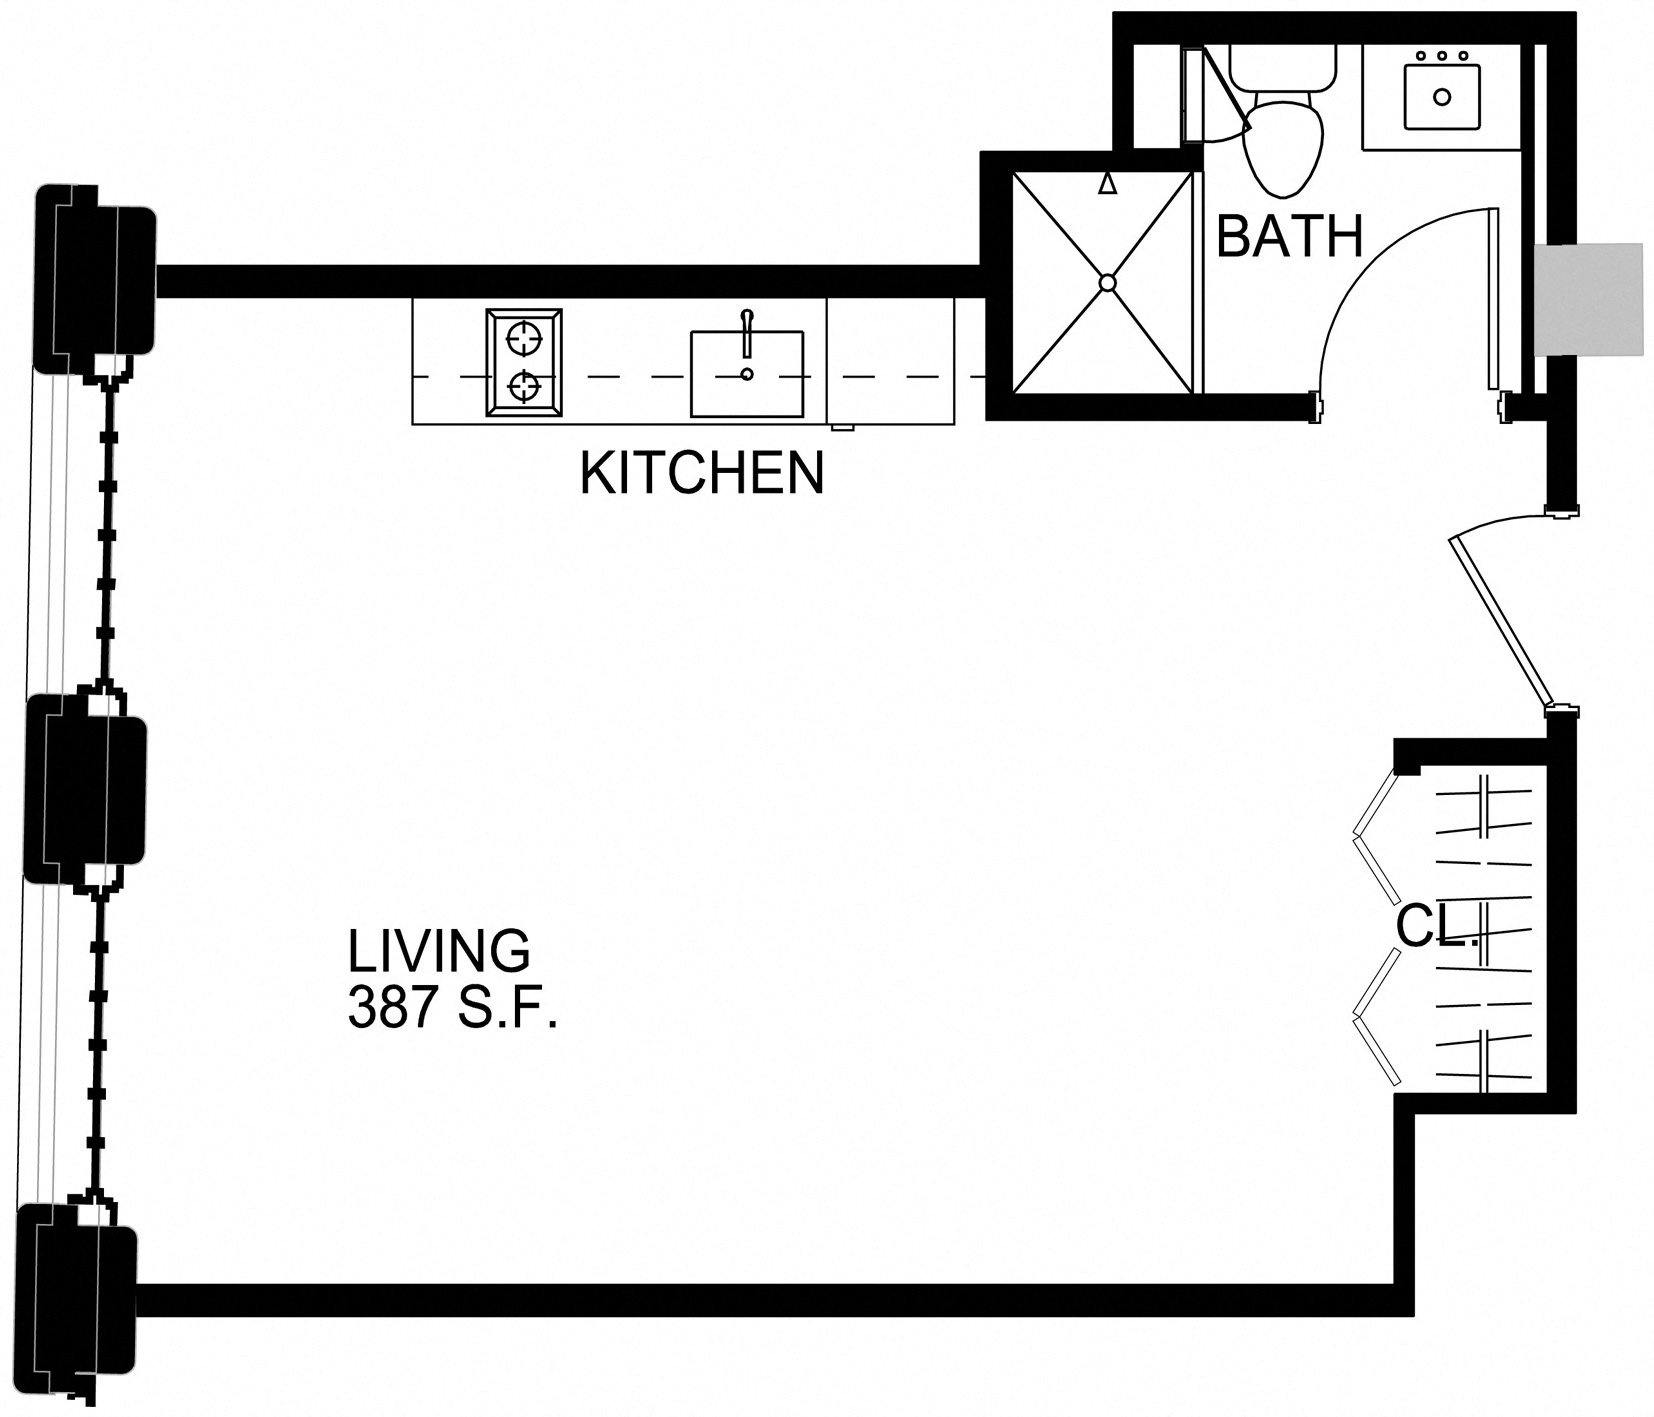 Floorplan for Apartment #S2503, 0 bedroom unit at Halstead Providence